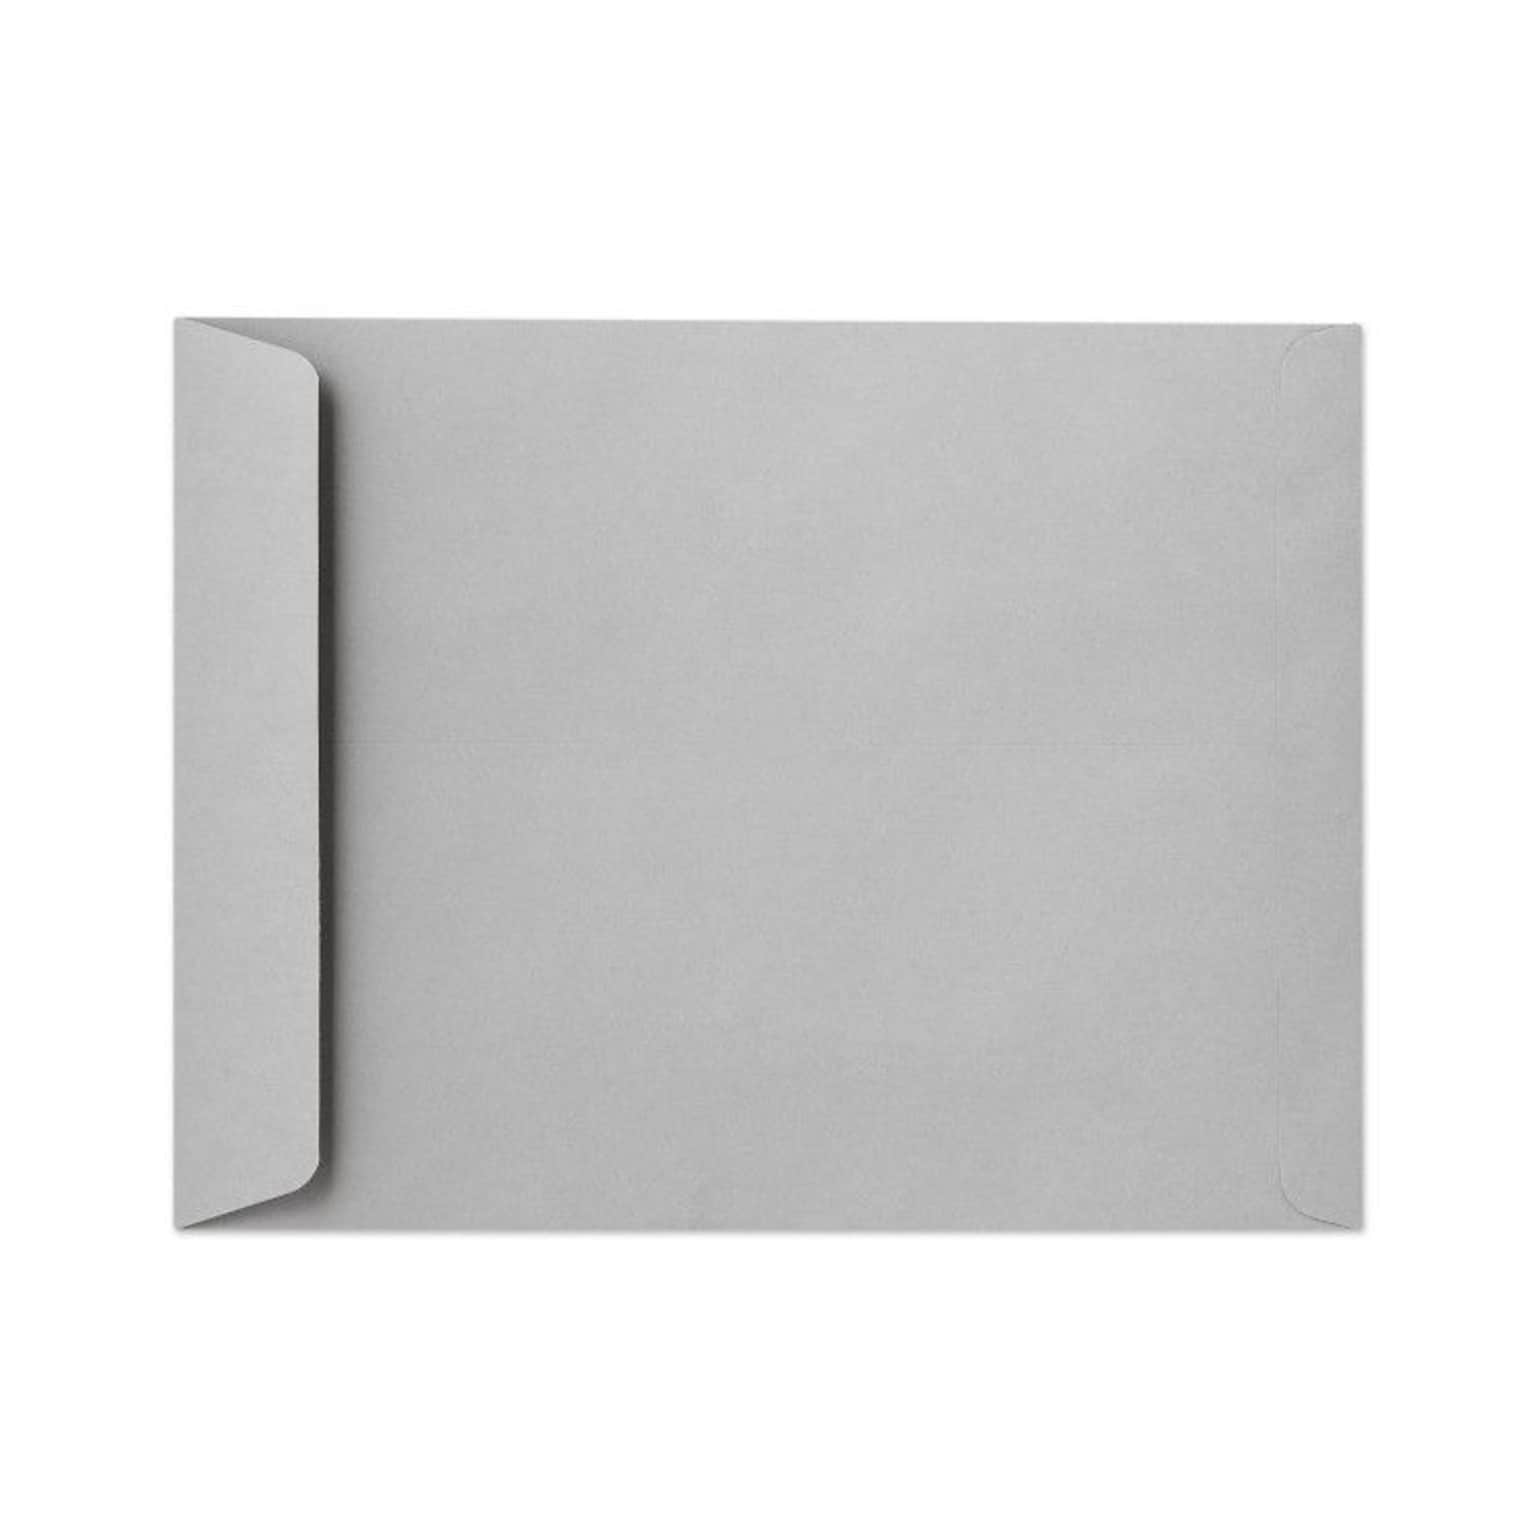 LUX Open End Open End Catalog Envelope, 12 1/2 x 18 1/2, Gray, 50/Pack (92532-50)